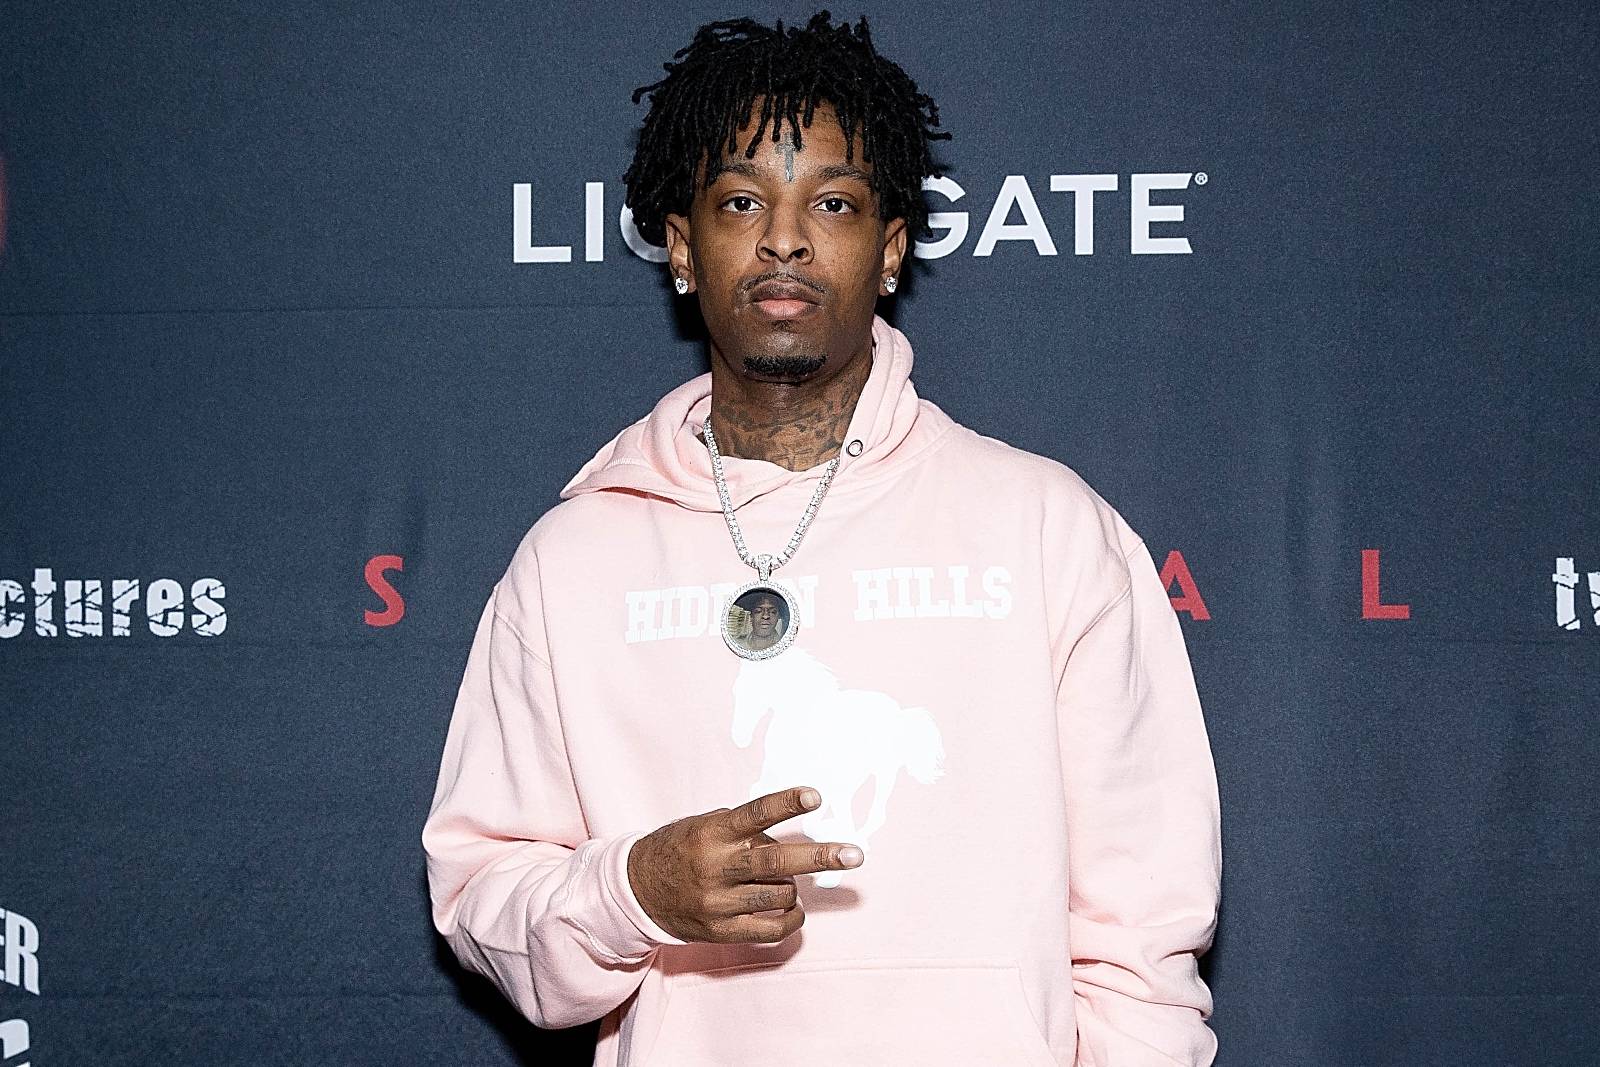 21 Savage Outfit from June 8, 2021, WHAT'S ON THE STAR?